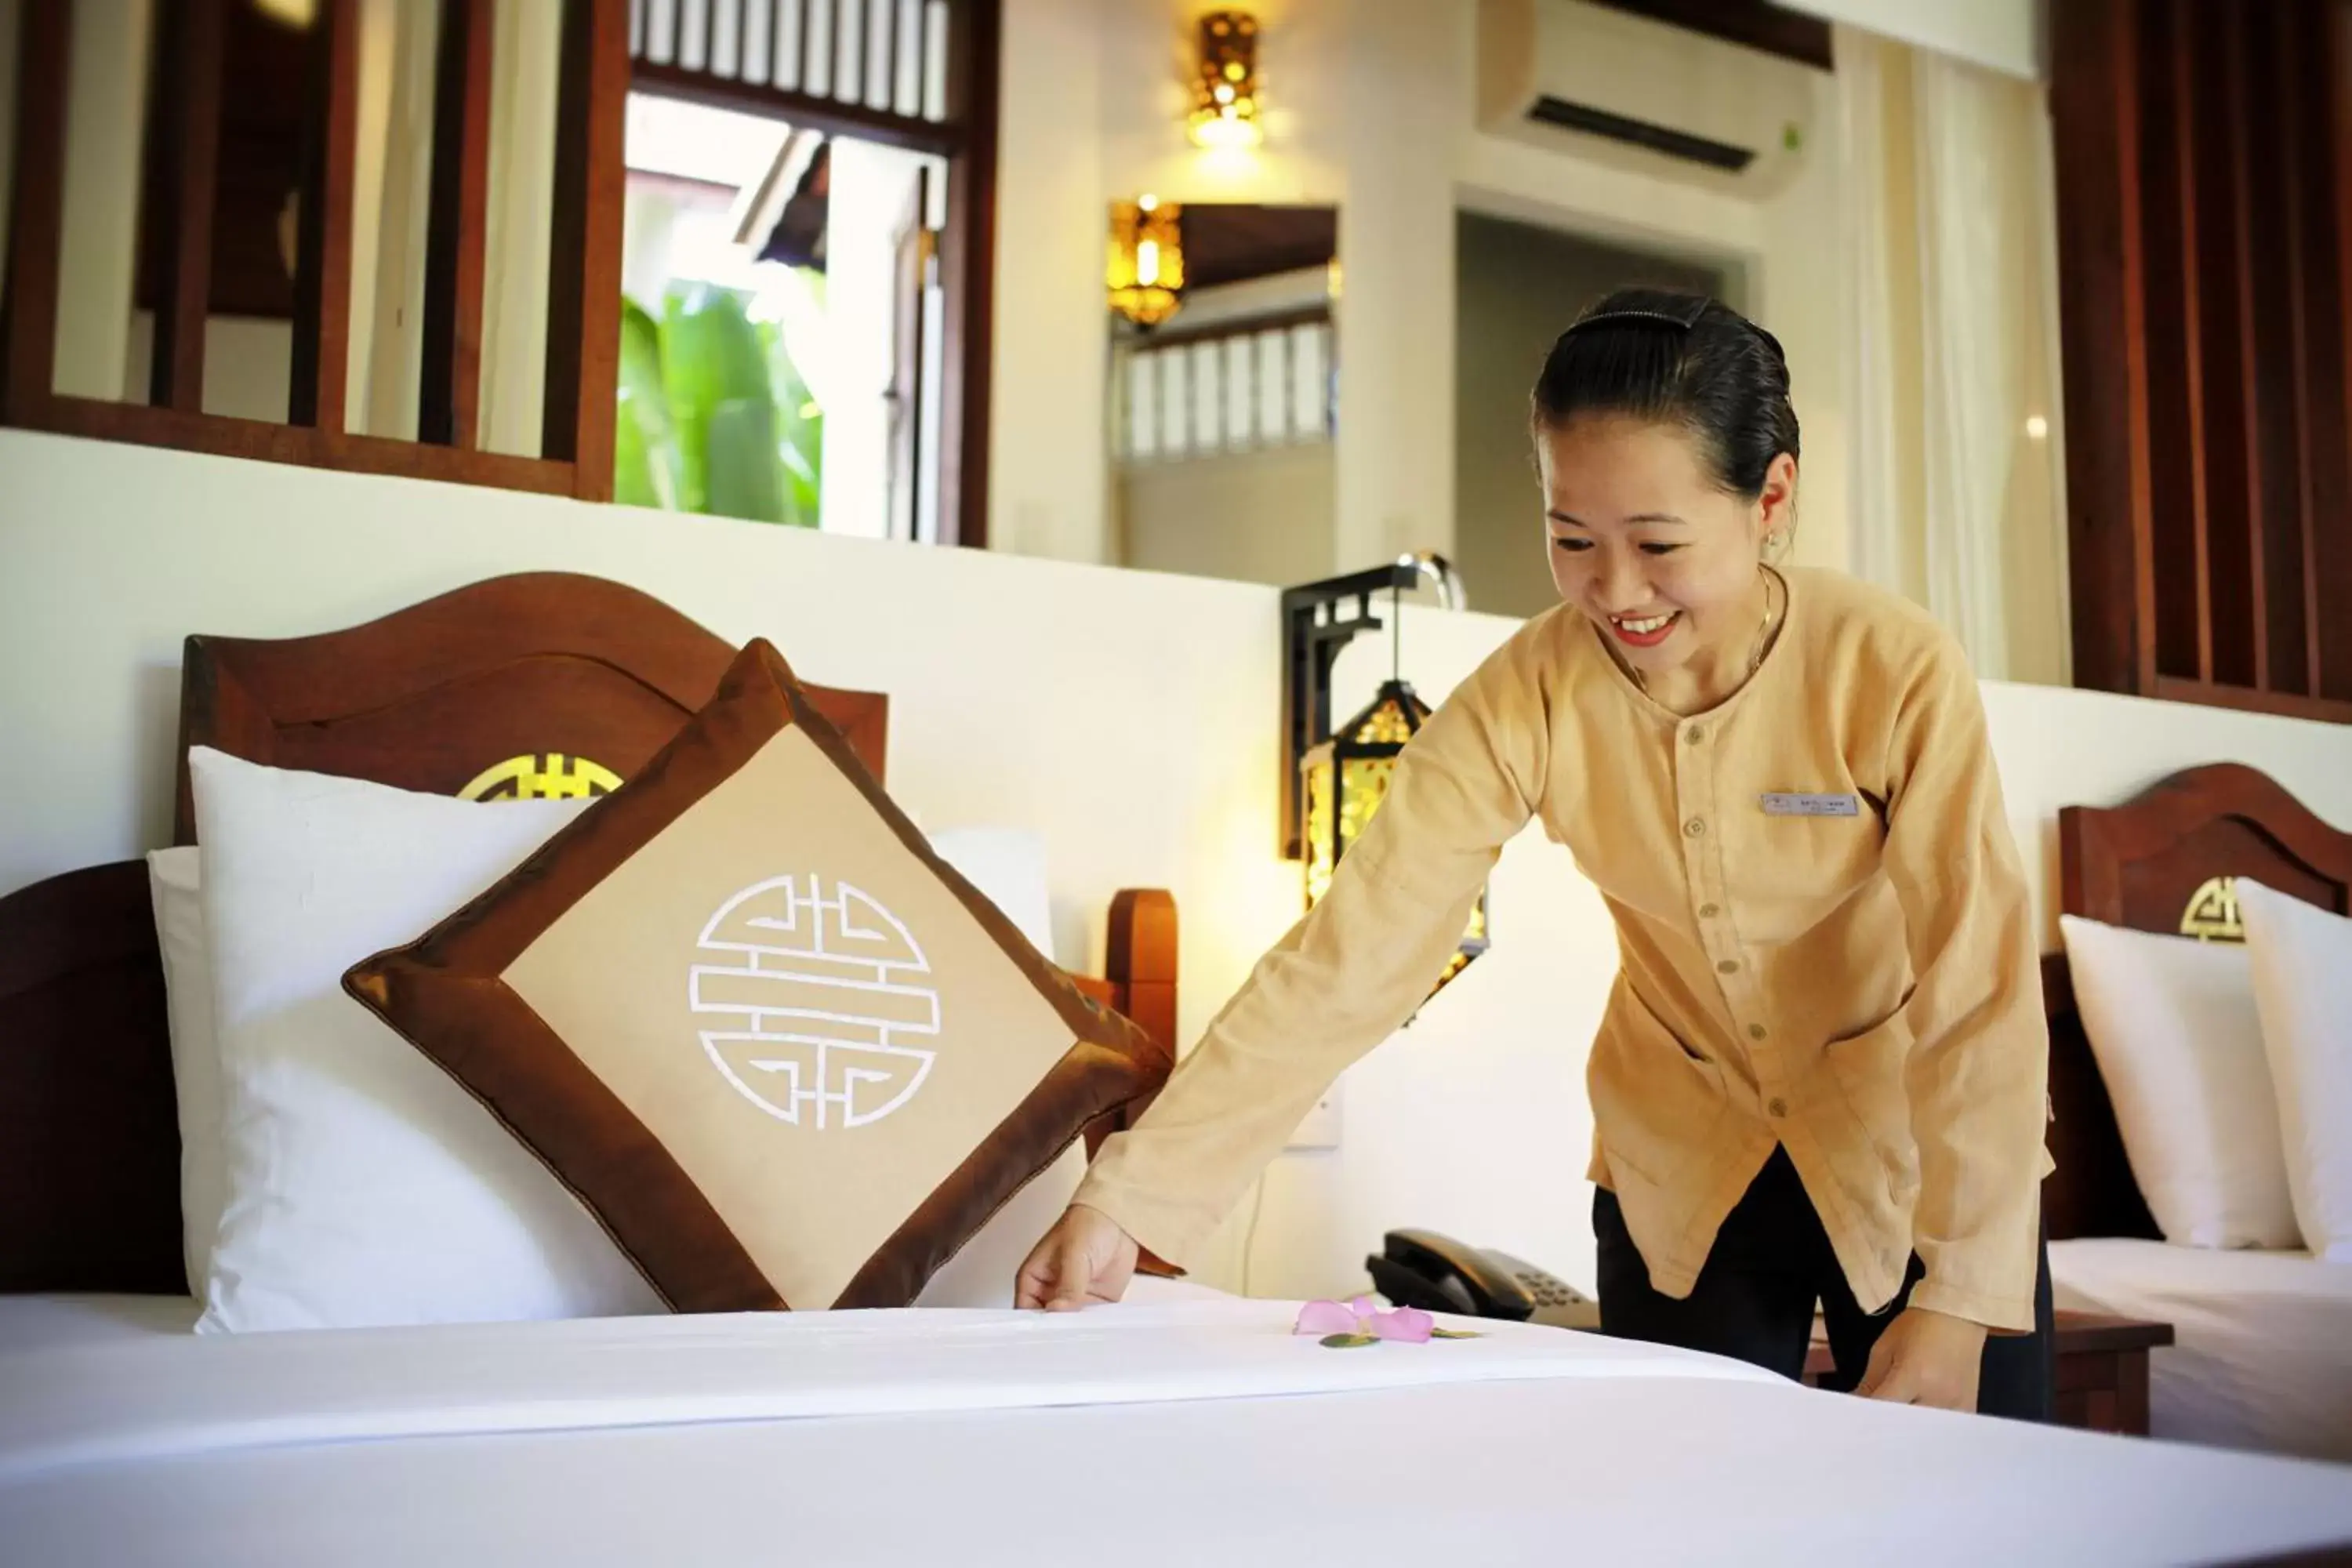 Staff in Legacy Hoi An Resort - formerly Ancient House Village Resort & Spa